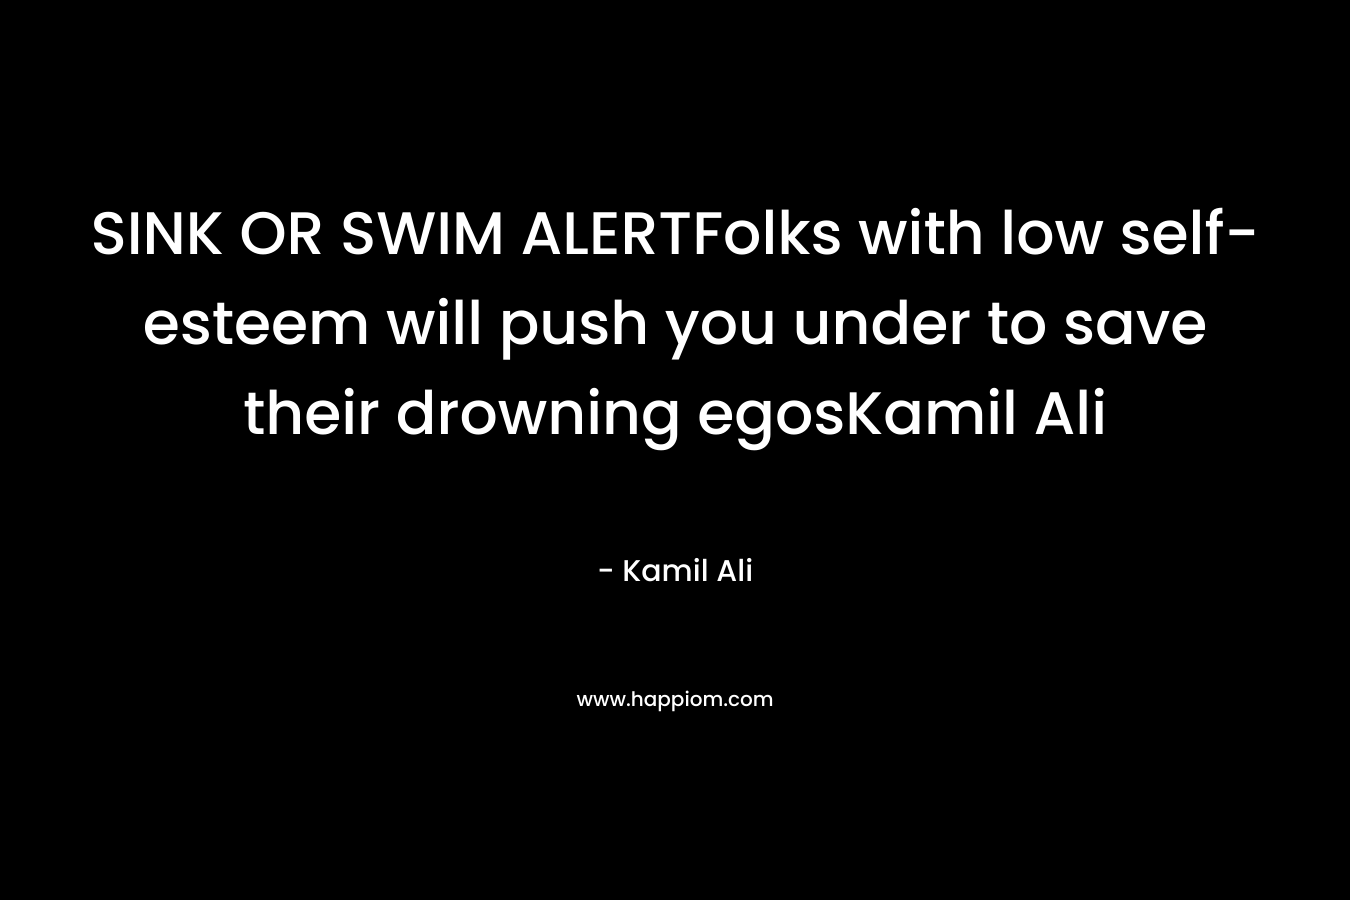 SINK OR SWIM ALERTFolks with low self-esteem will push you under to save their drowning egosKamil Ali